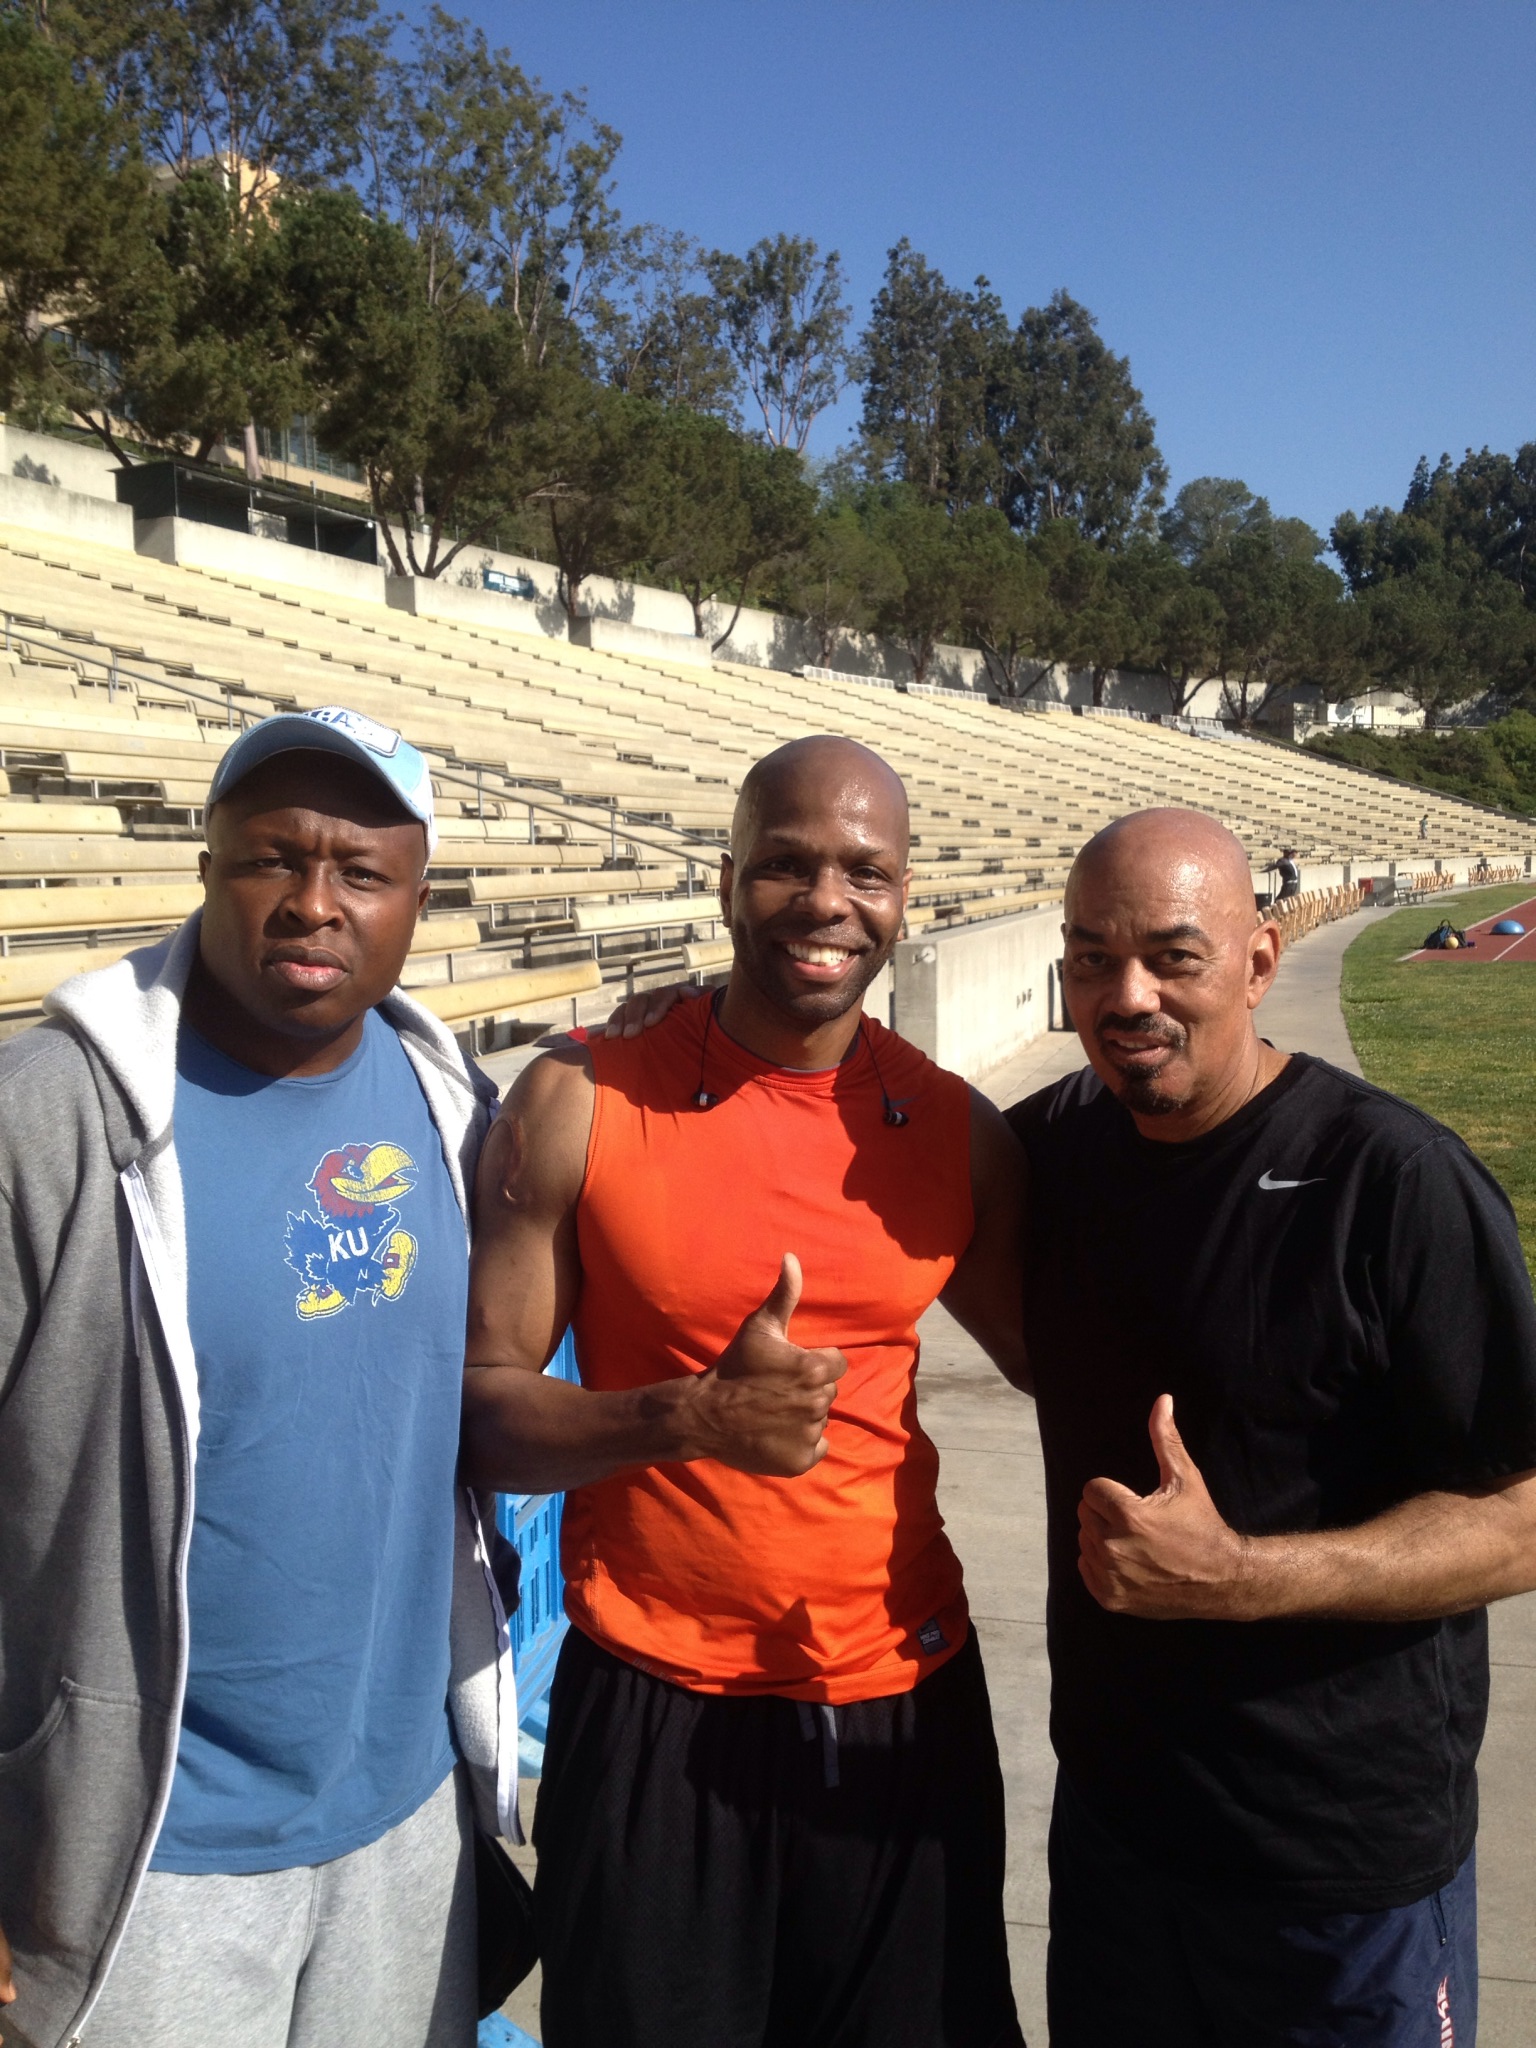 Drake stadium workouts with James Ingram on right and Steve Harris.